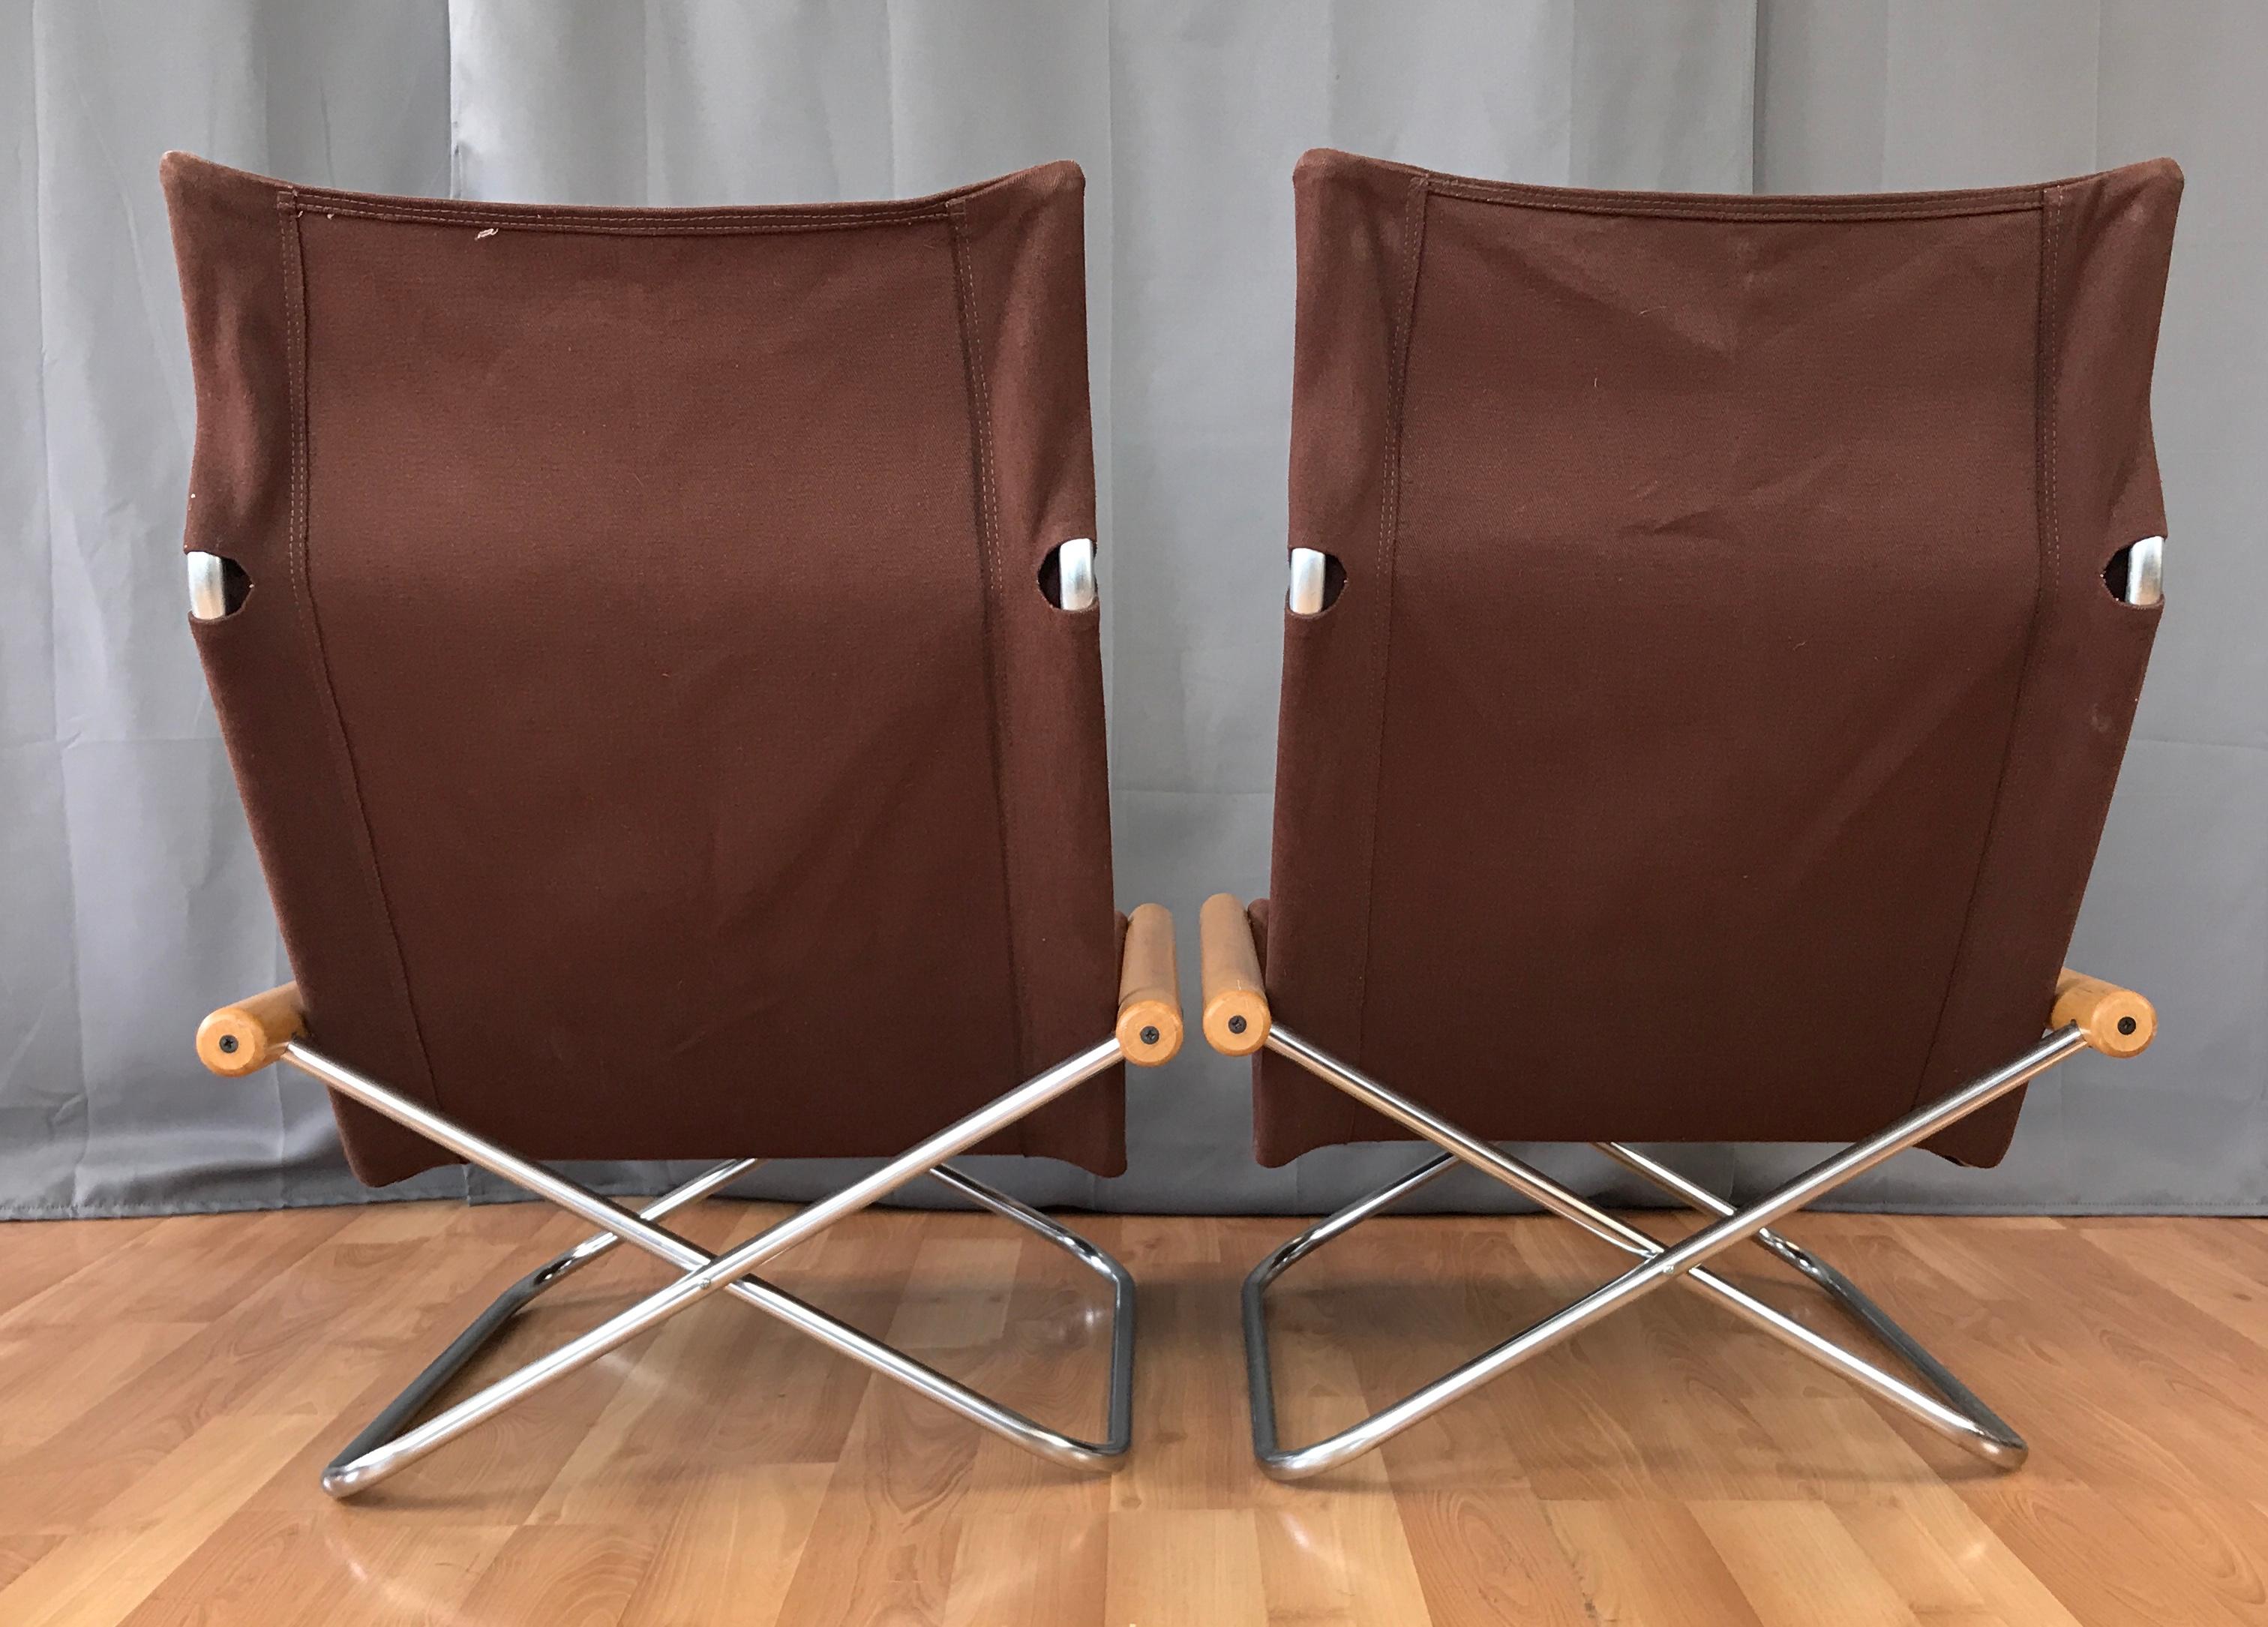 Canvas Takeshi Nii for Trend Pacific “NY” Folding Chairs & Ottoman Set